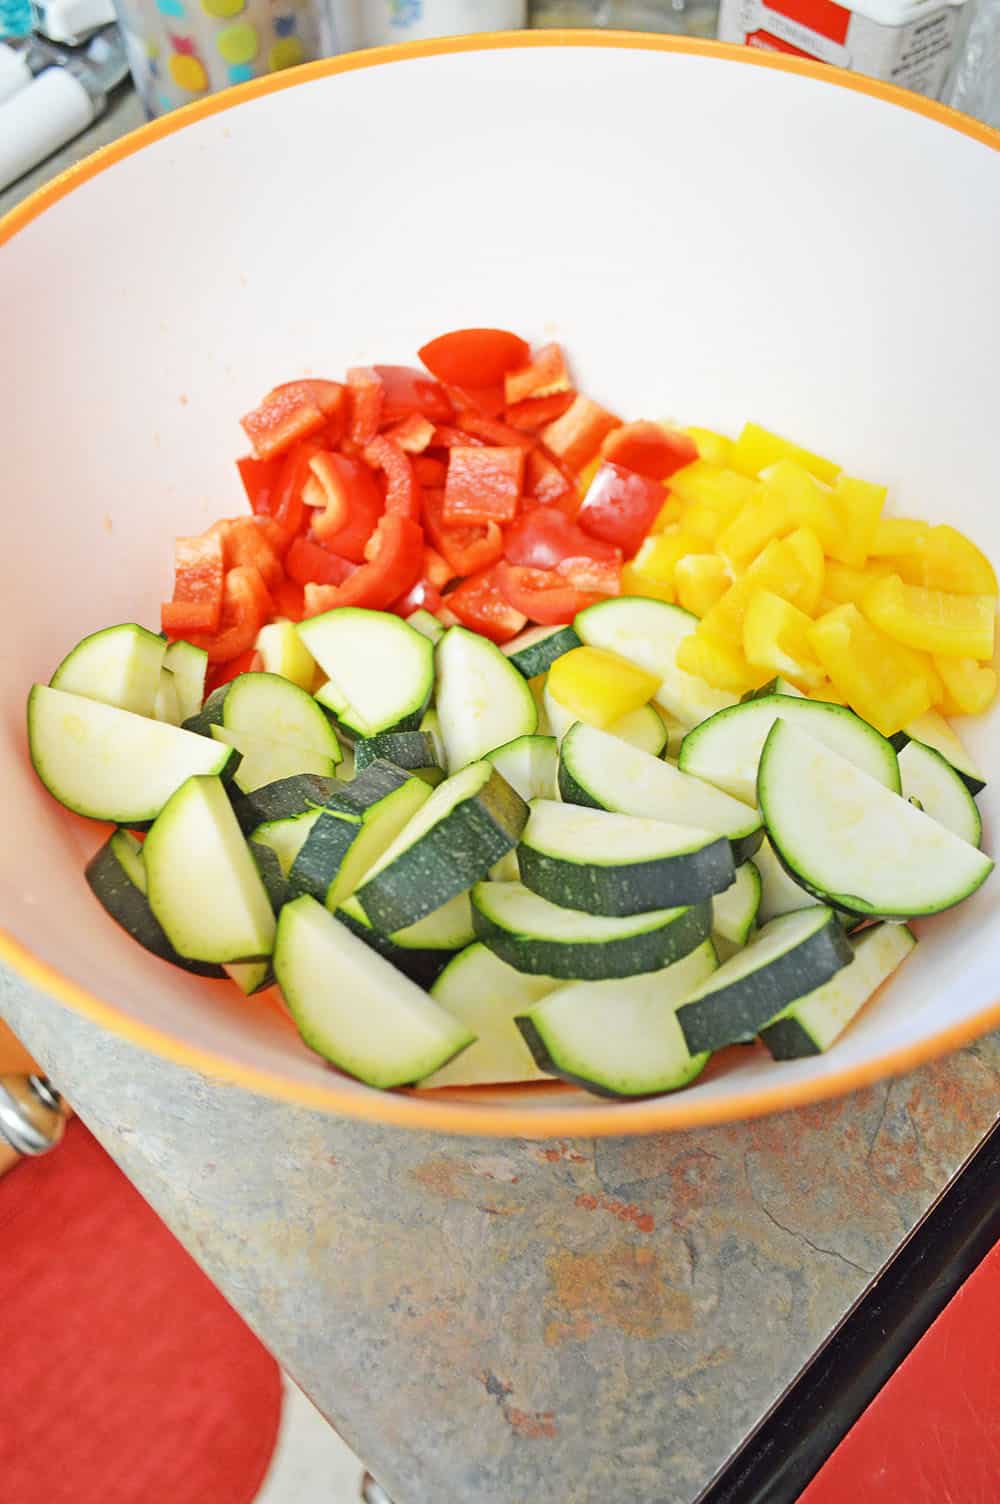 cut up vegetables in a bowl